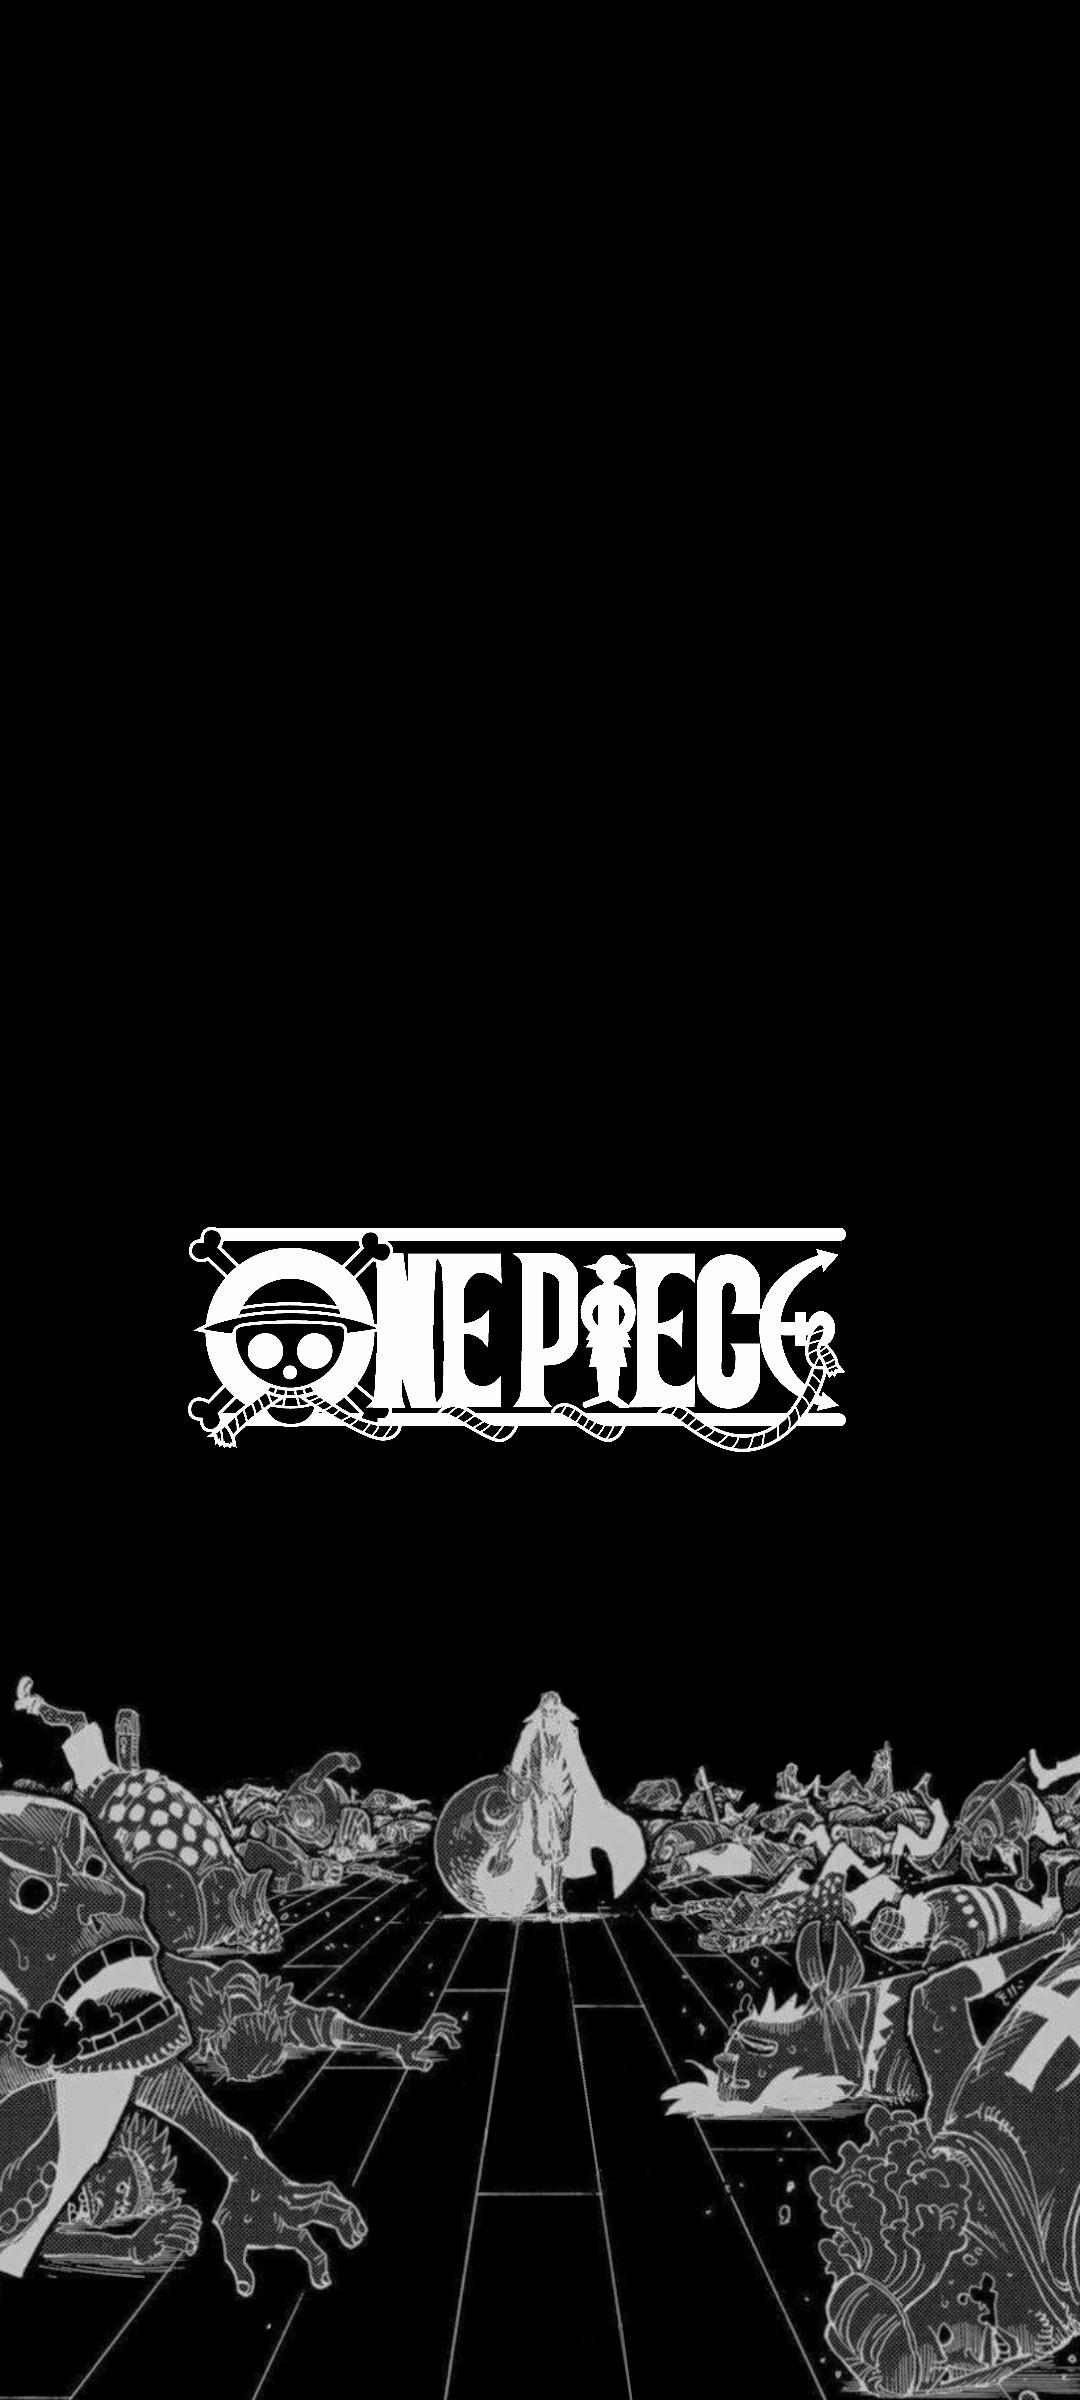 One Piece wallpaper for mobile devices. - One Piece